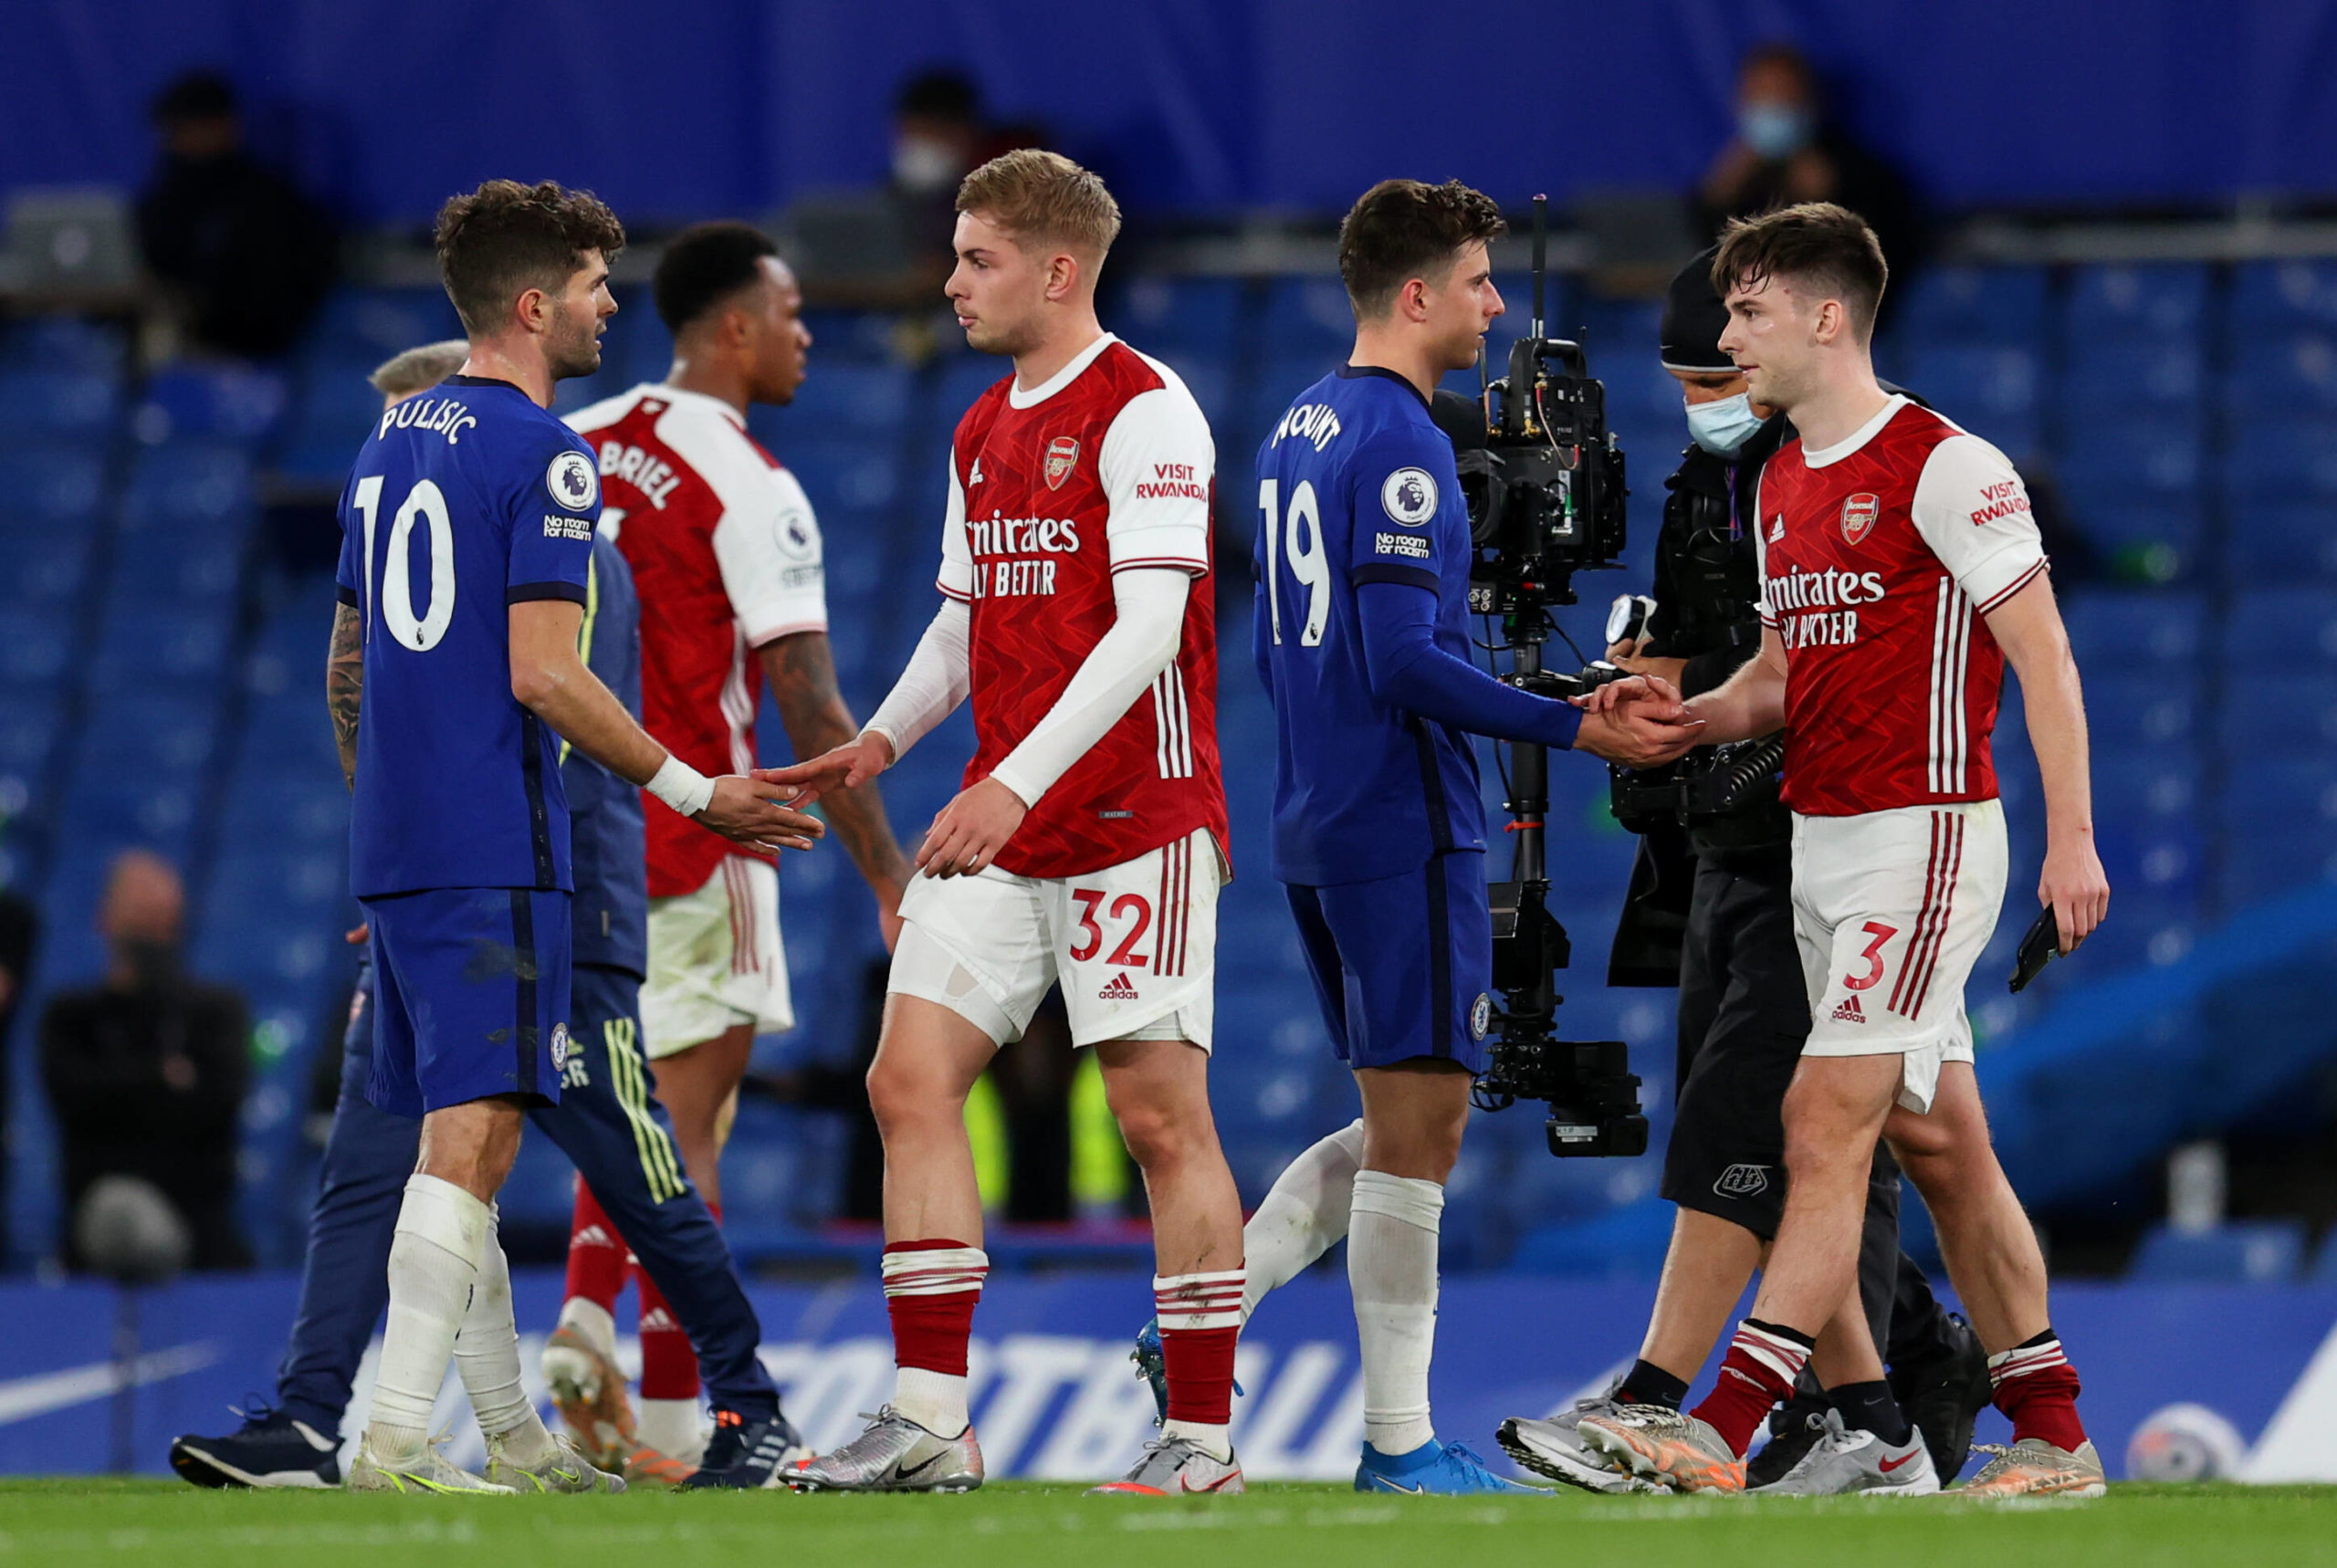 Chelsea vs Arsenal Live: A LONDON DERBY awaits, The Gunners face Chelsea in their Top 4 quest, Follow Chelsea vs Arsenal LIVE: Check Team News, Predictions, Live Streaming